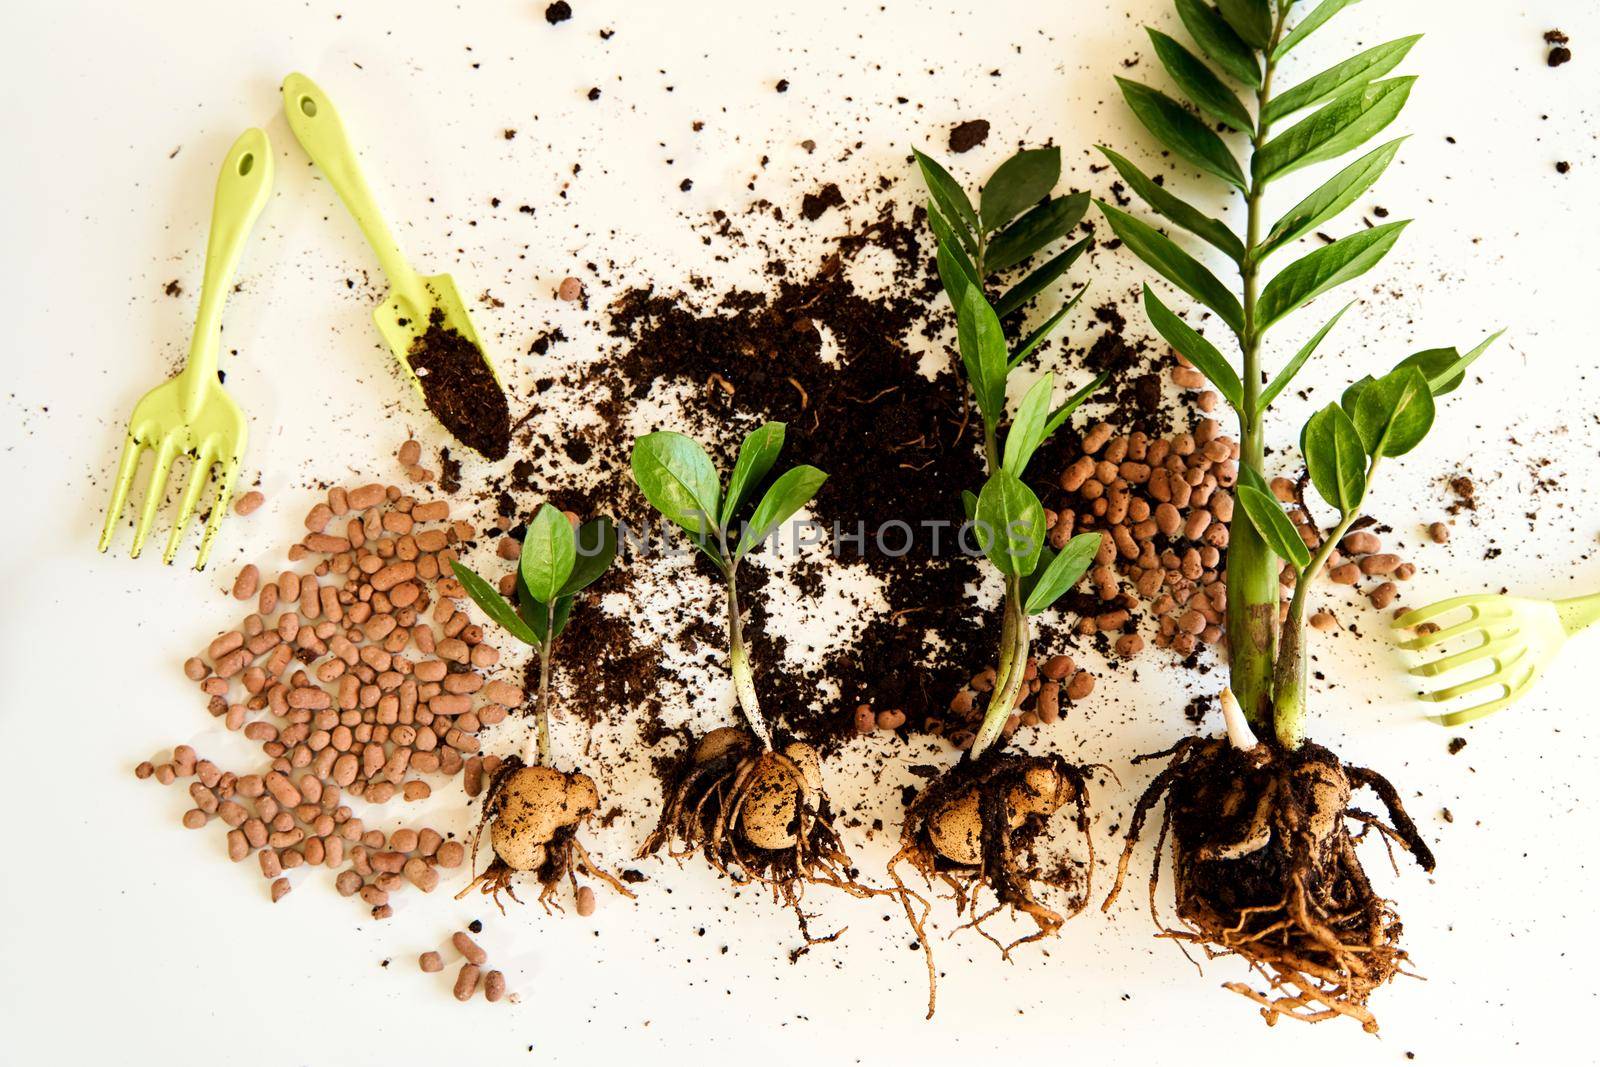 The process of transplanting a home flower into a new pot on a white background by Try_my_best